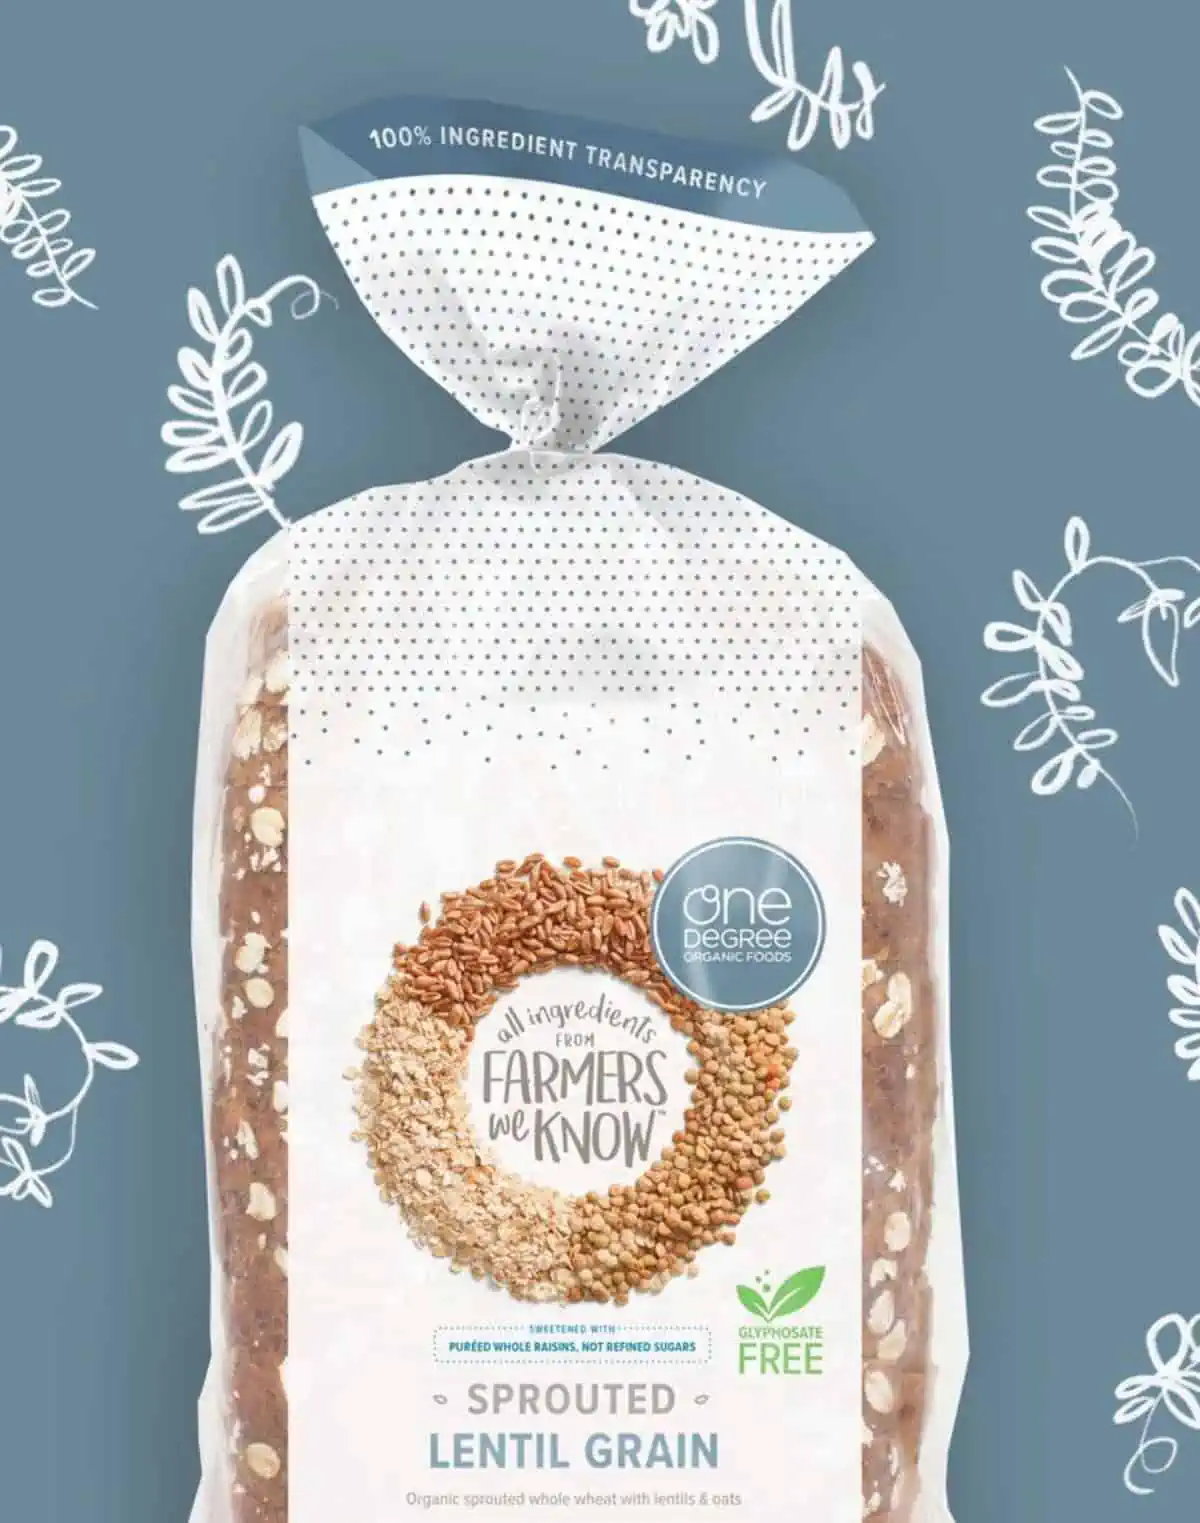 A package of One Degree Organic vegan bread.